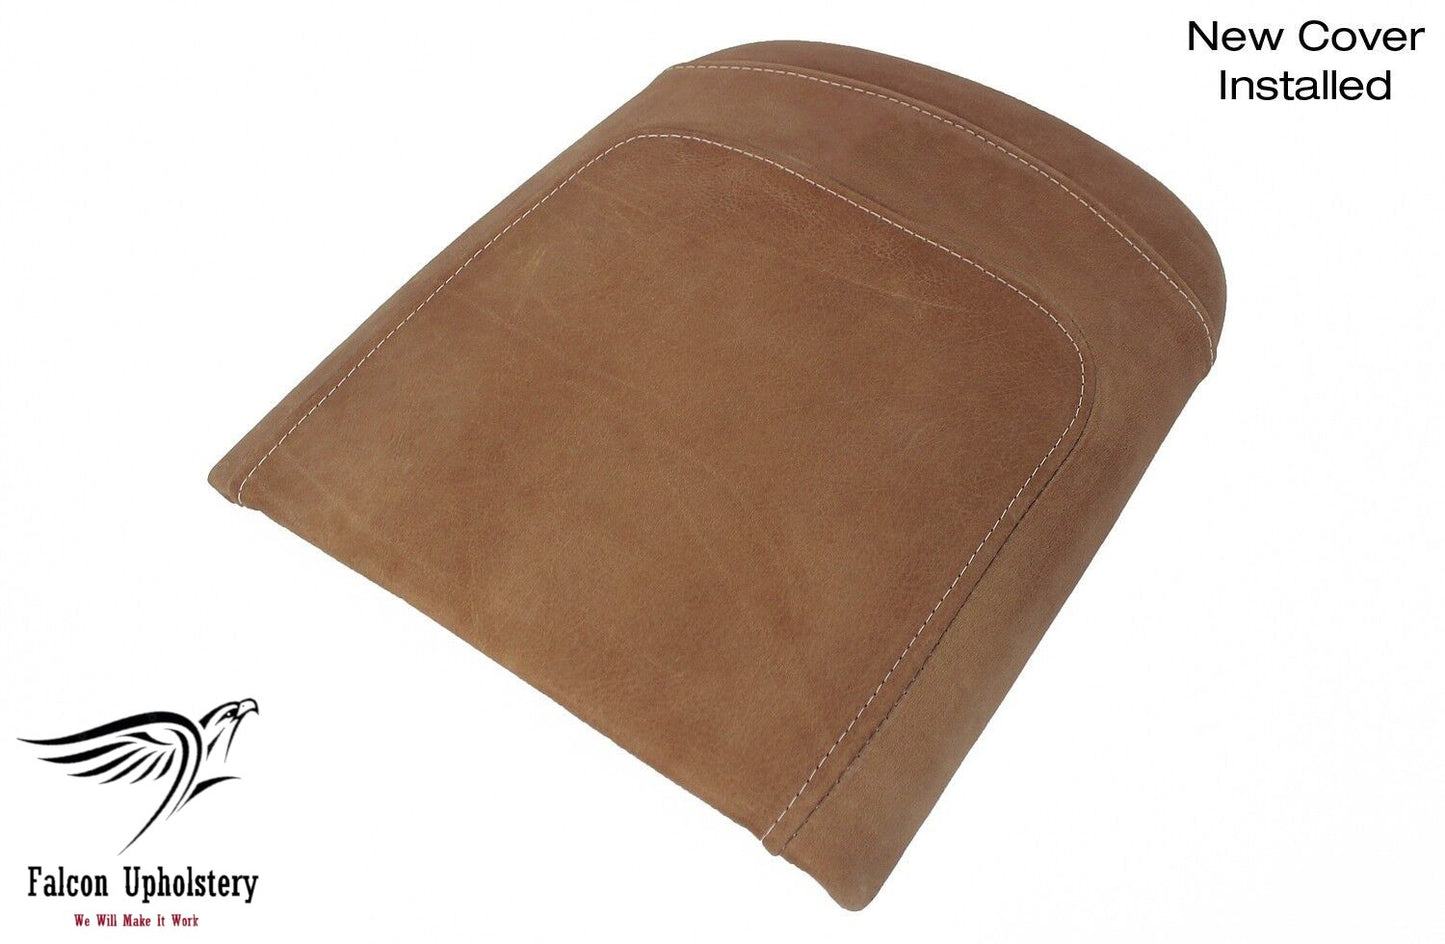 2001-2003 Ford F150 King Ranch Replacement LEATHER Replacement Console Lid Cover In Distressed Light Brown